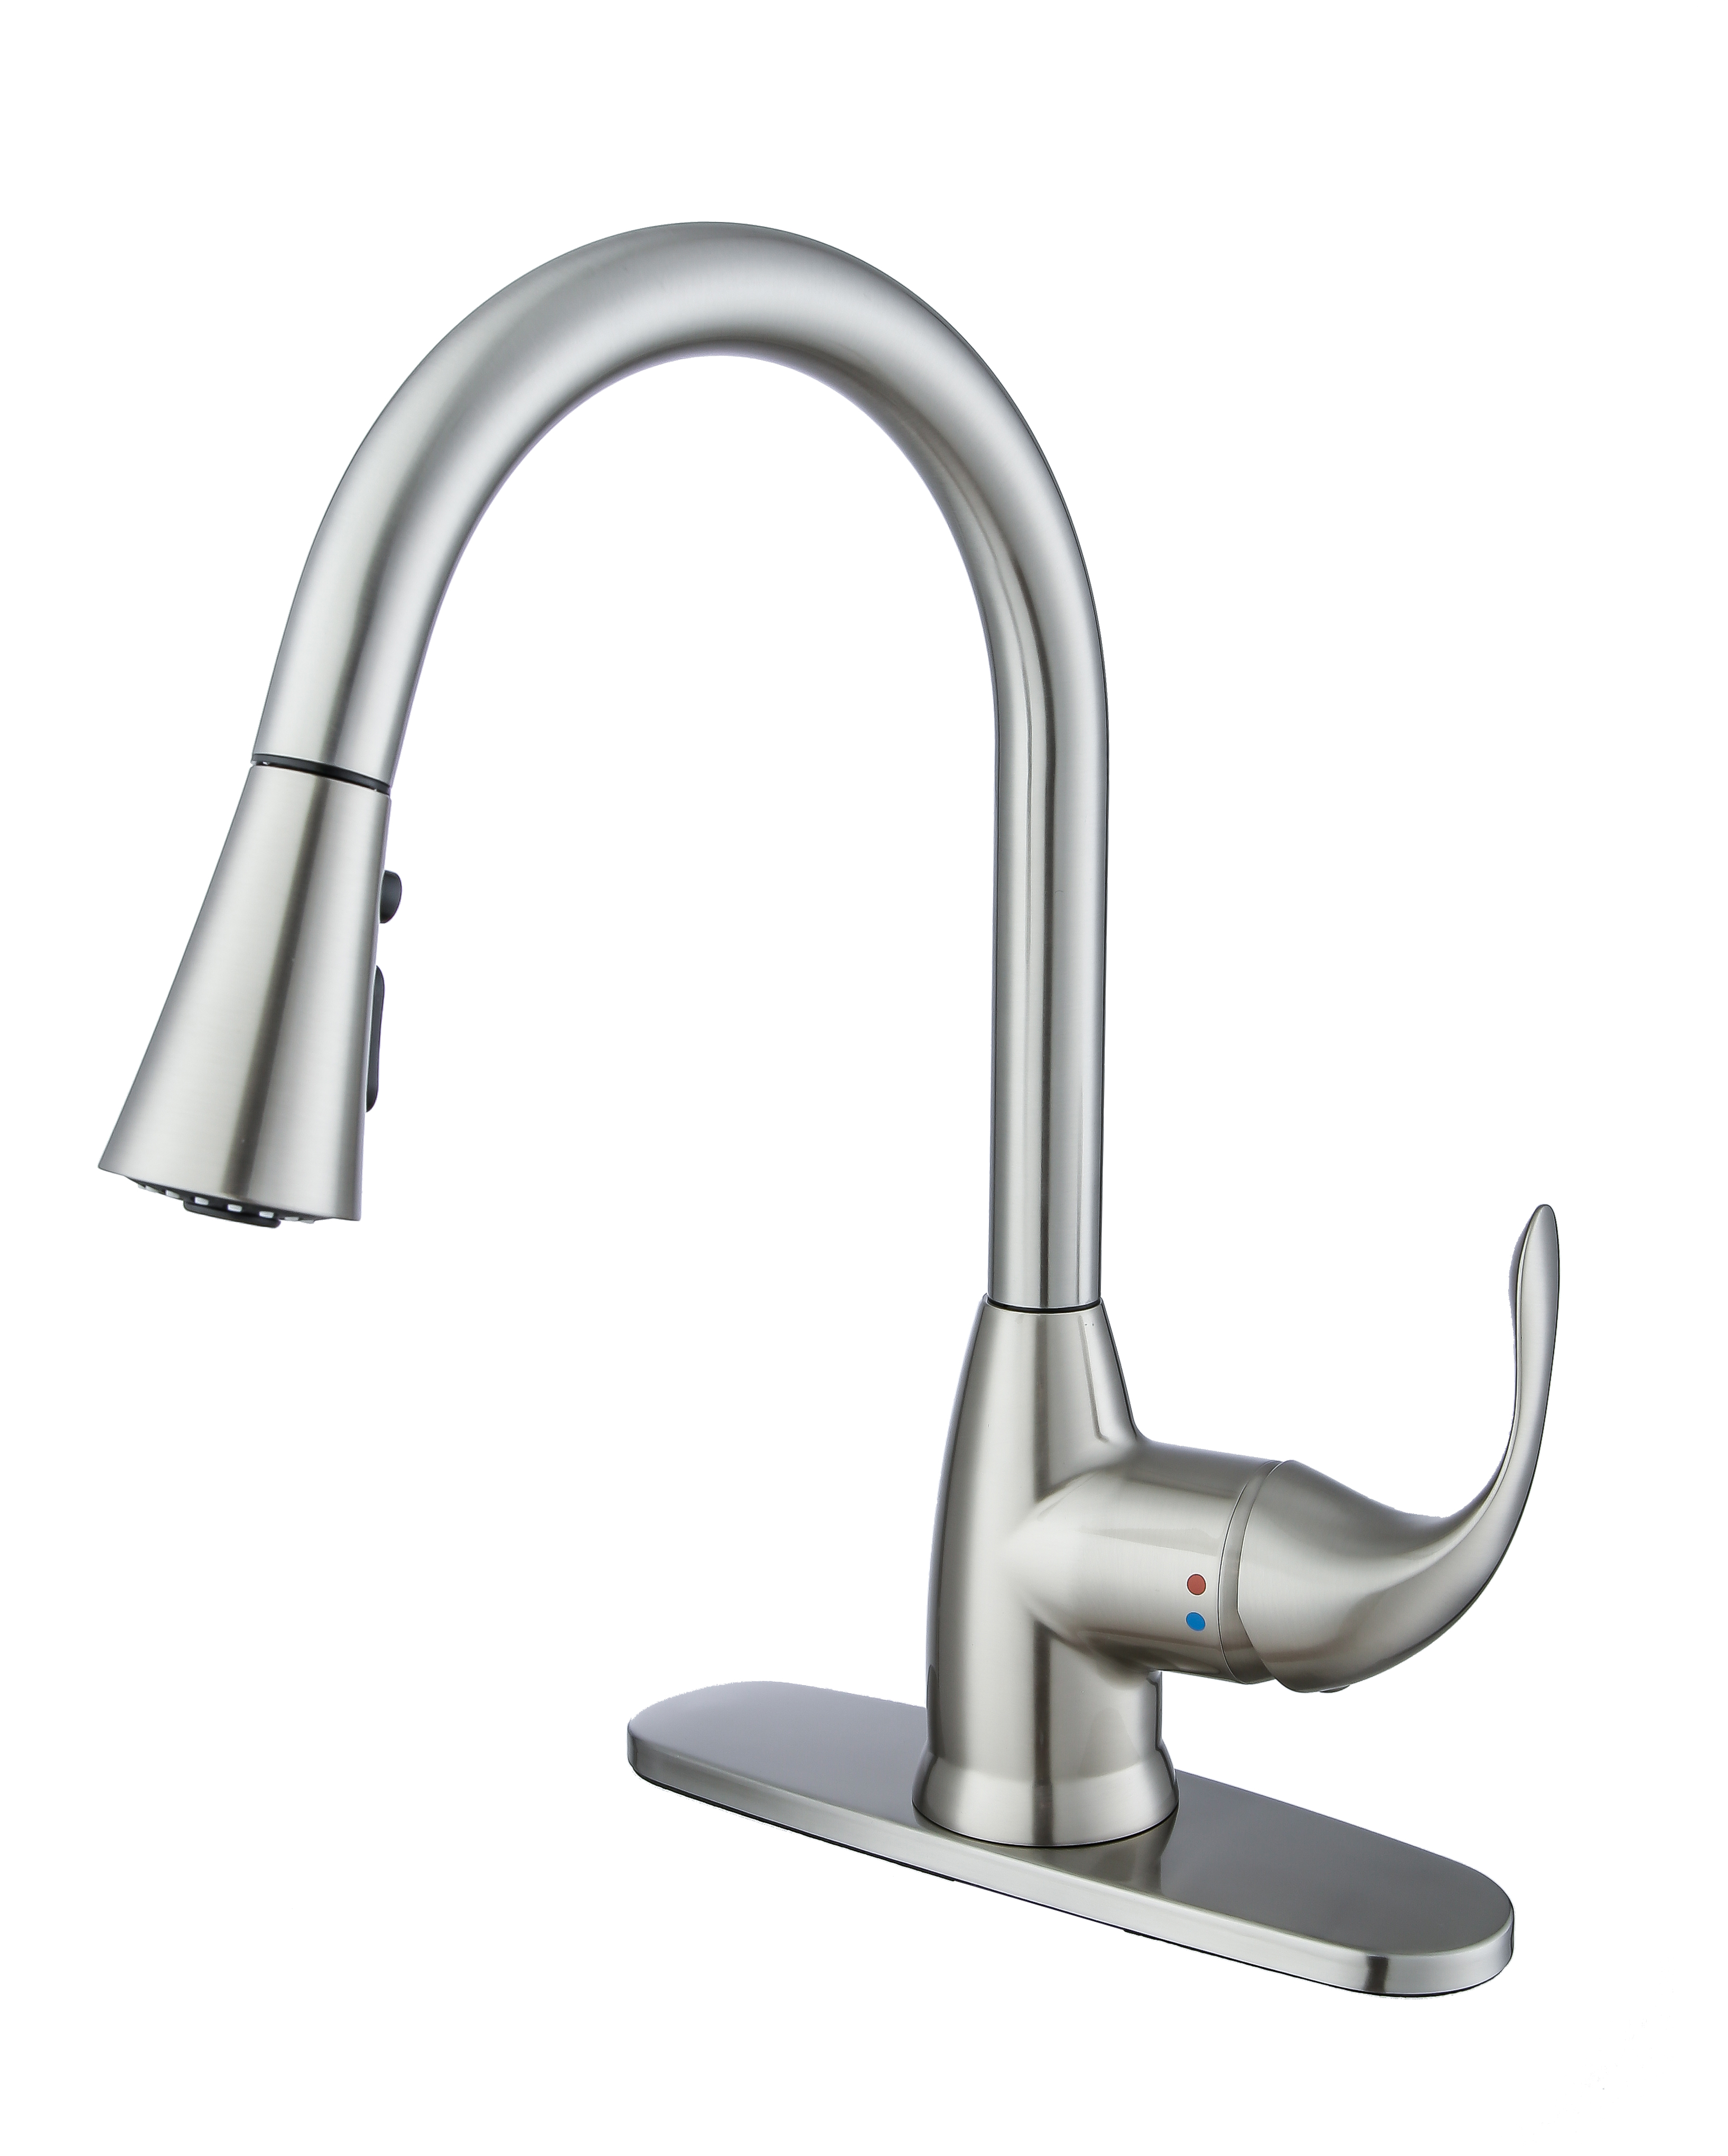 Frigidaire Alexis Single Handle Pull Down Kitchen Sink Faucet in Brushed Nickel with 3 Function Spray Head 23-Frigidaire-Alexis-BN - image 1 of 9